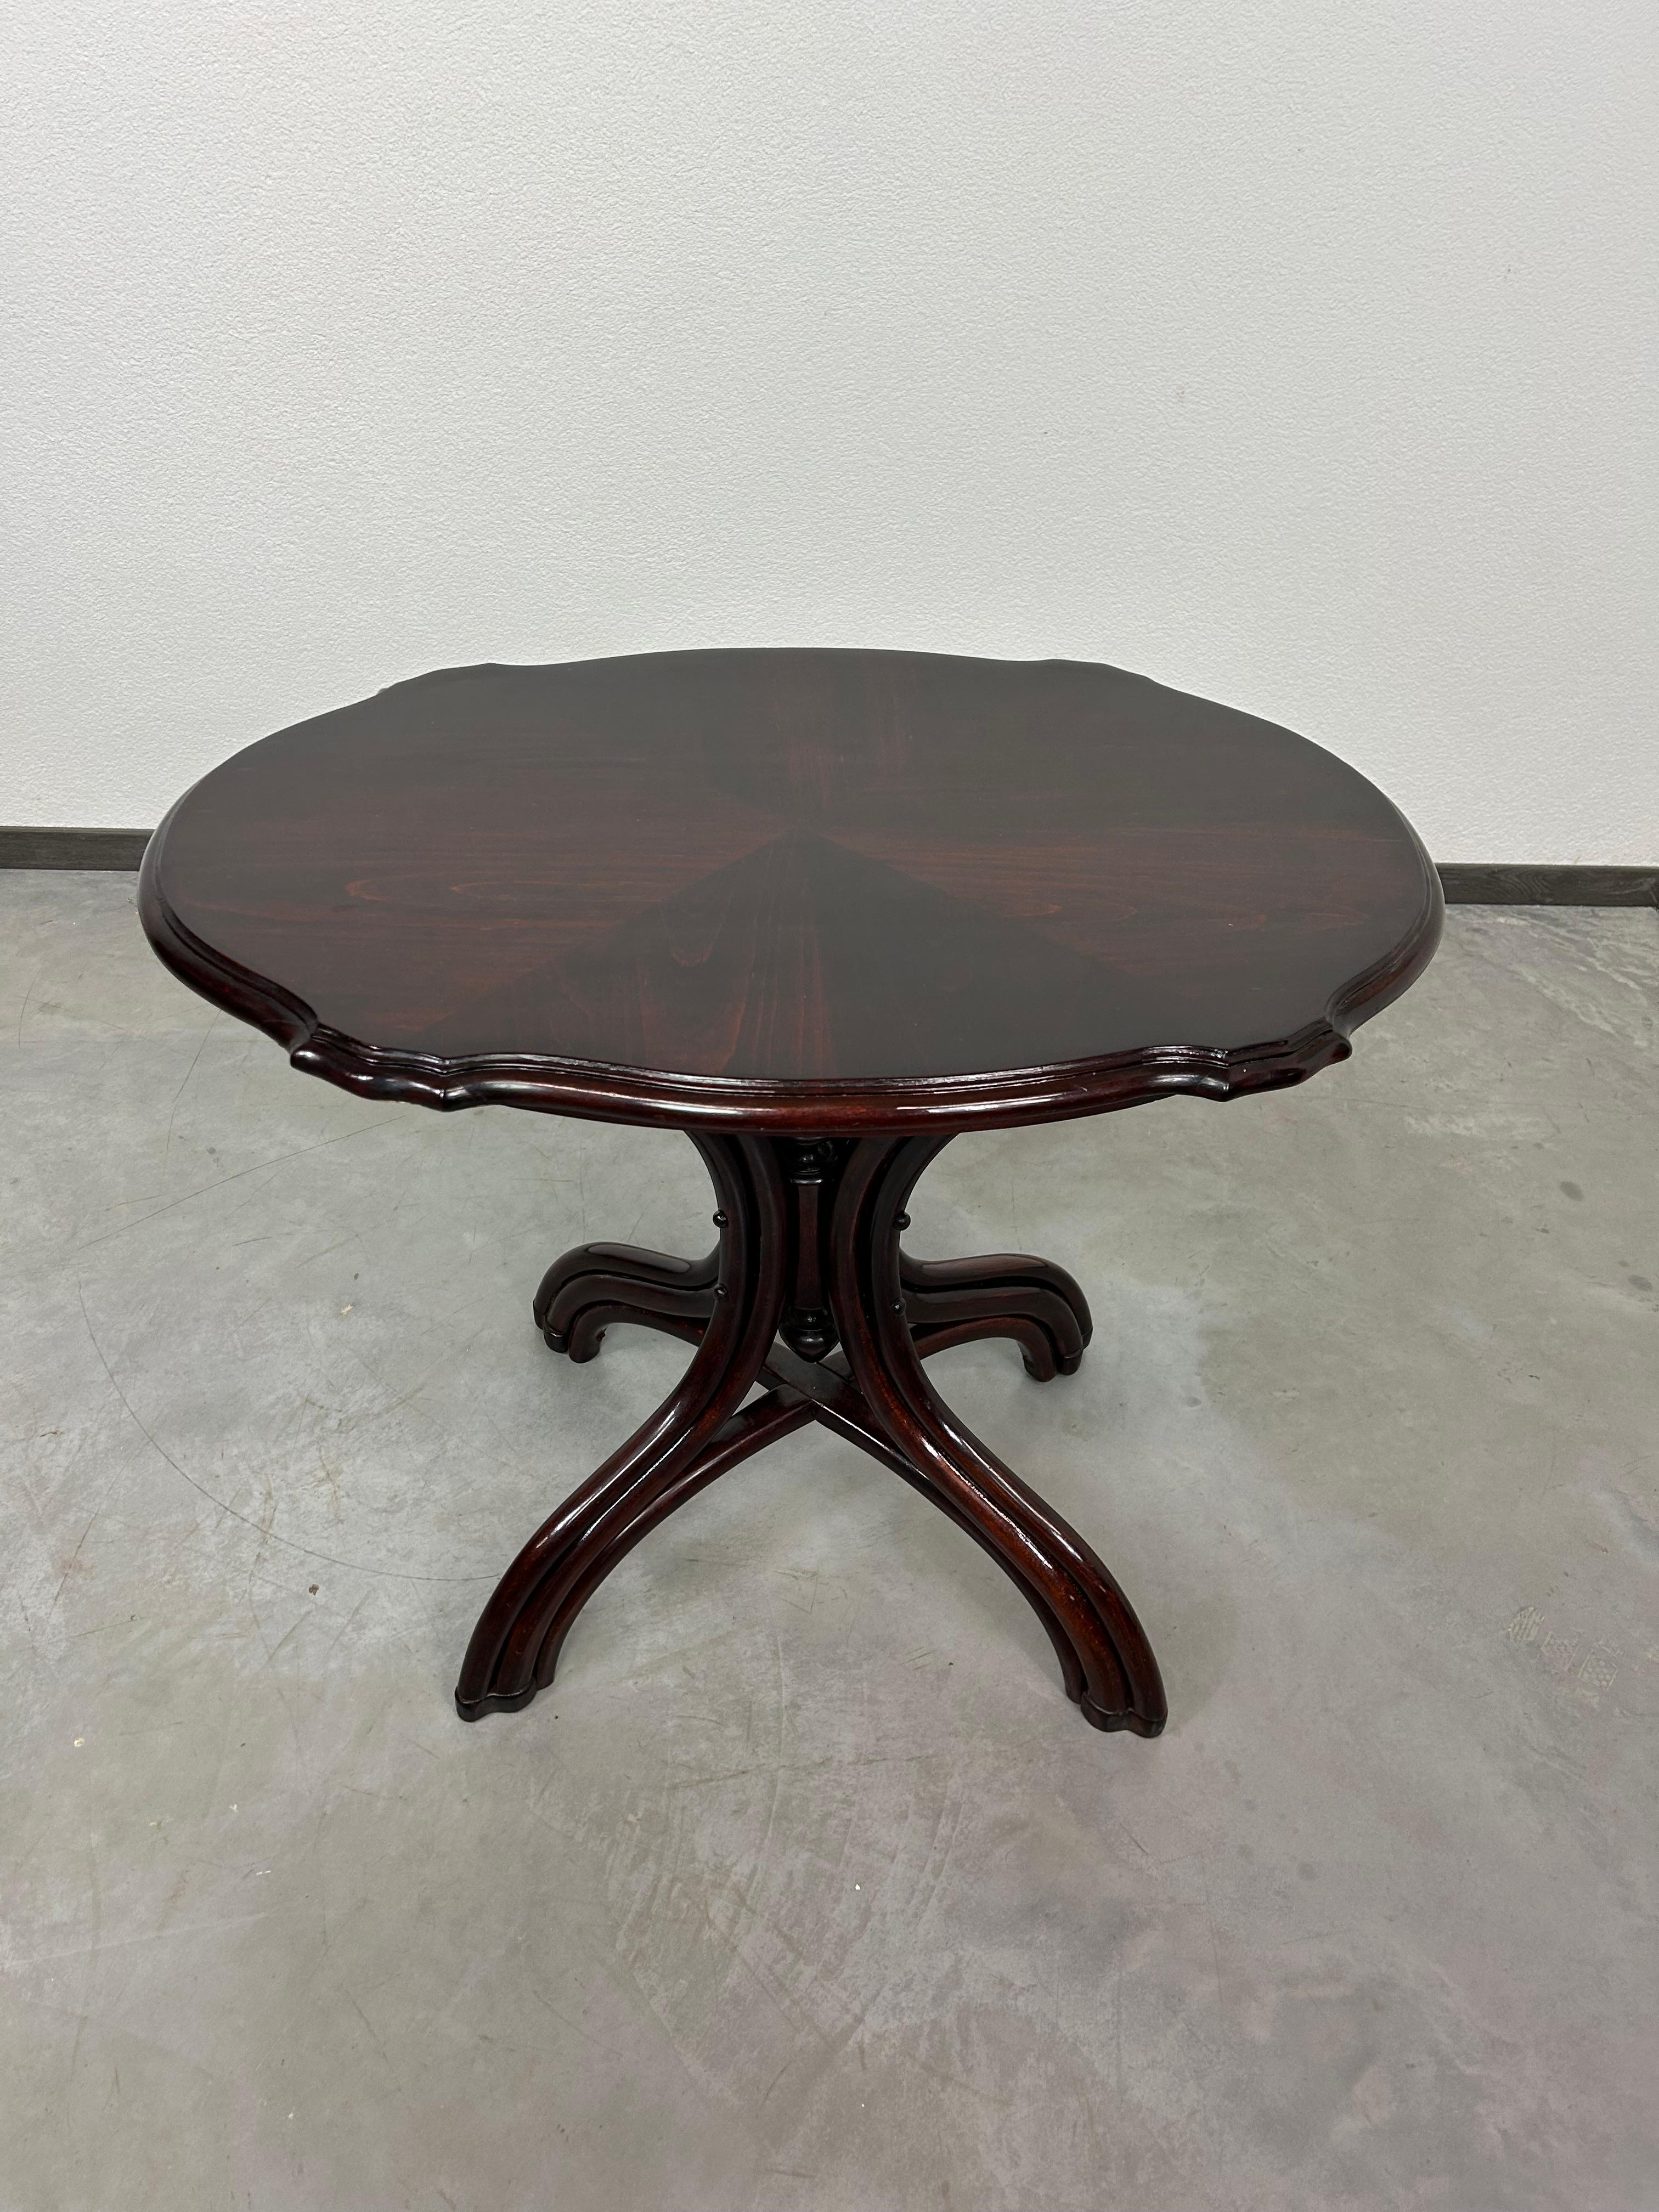 Vienna Secession 19th century bentwood Thonet table For Sale